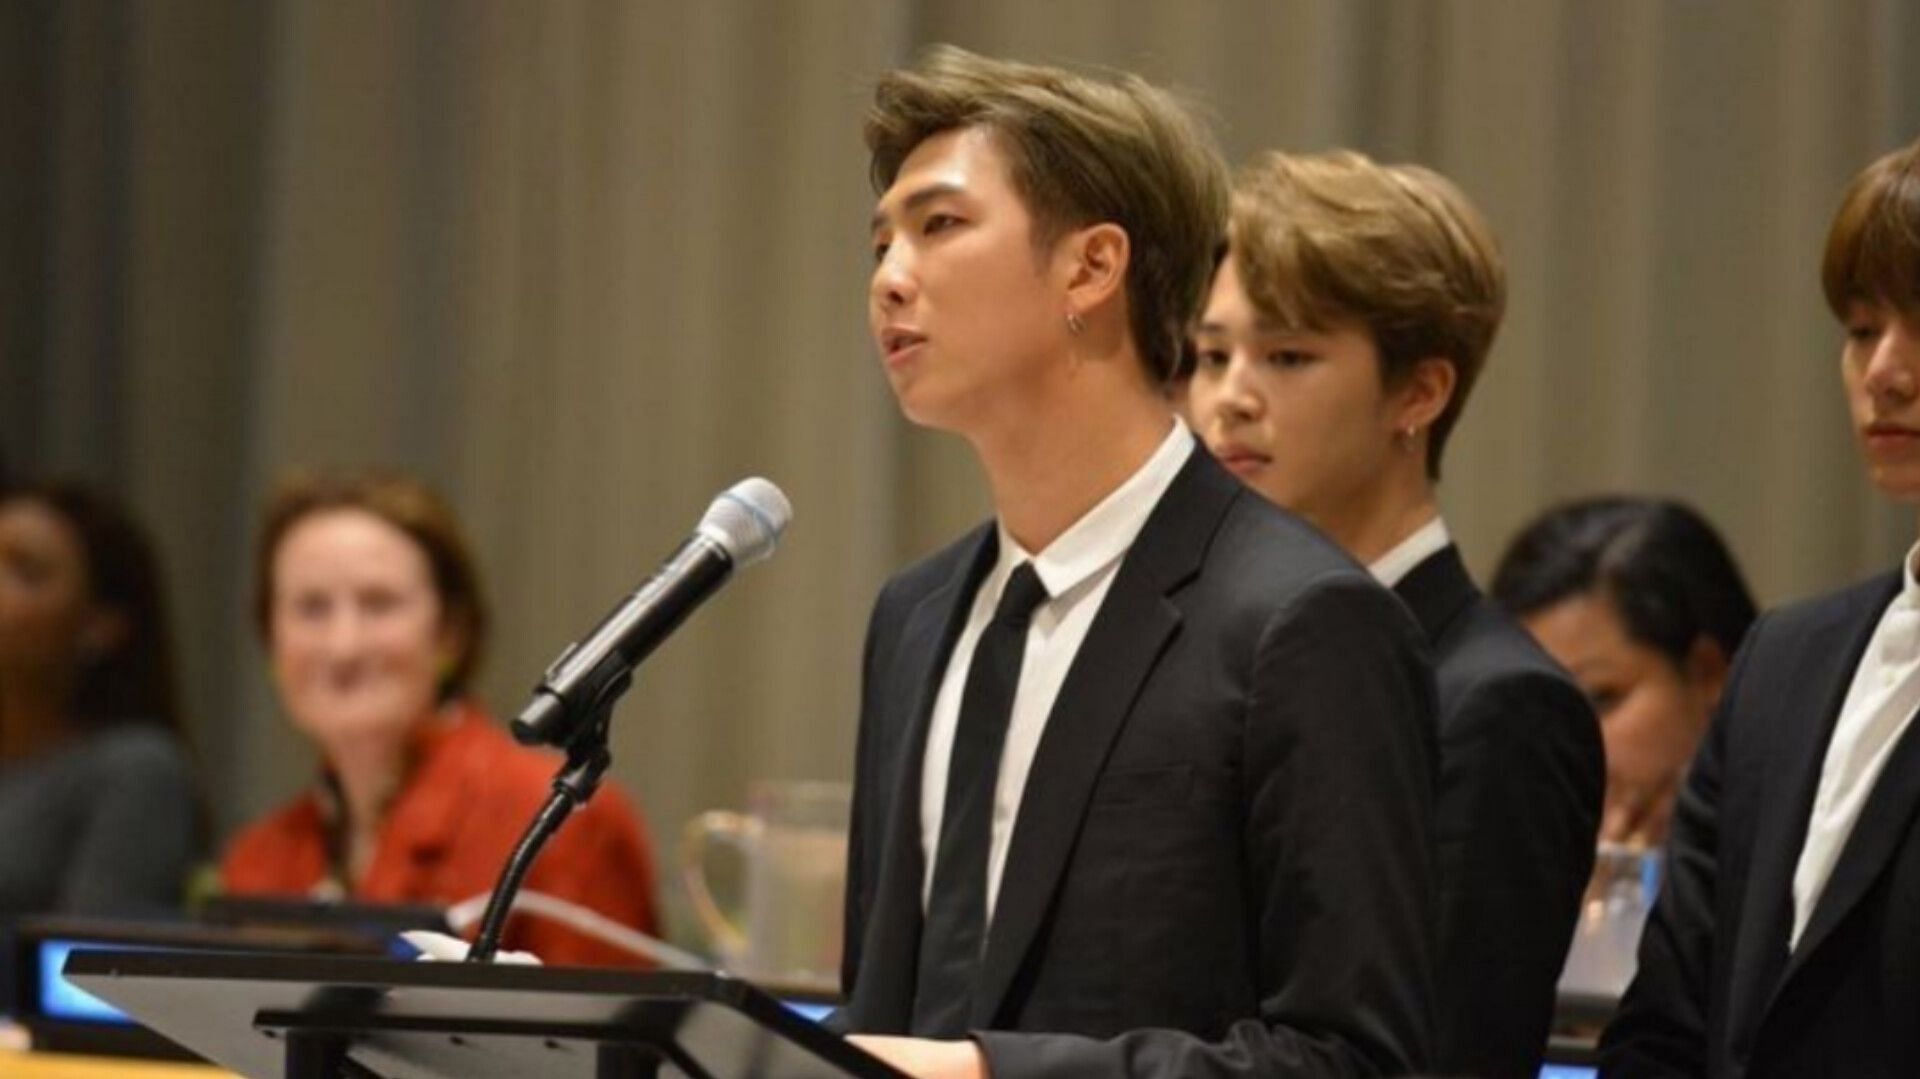 BTS's RM Is Speculated To Become The Ambassador Of A Korean Ministry -  Koreaboo